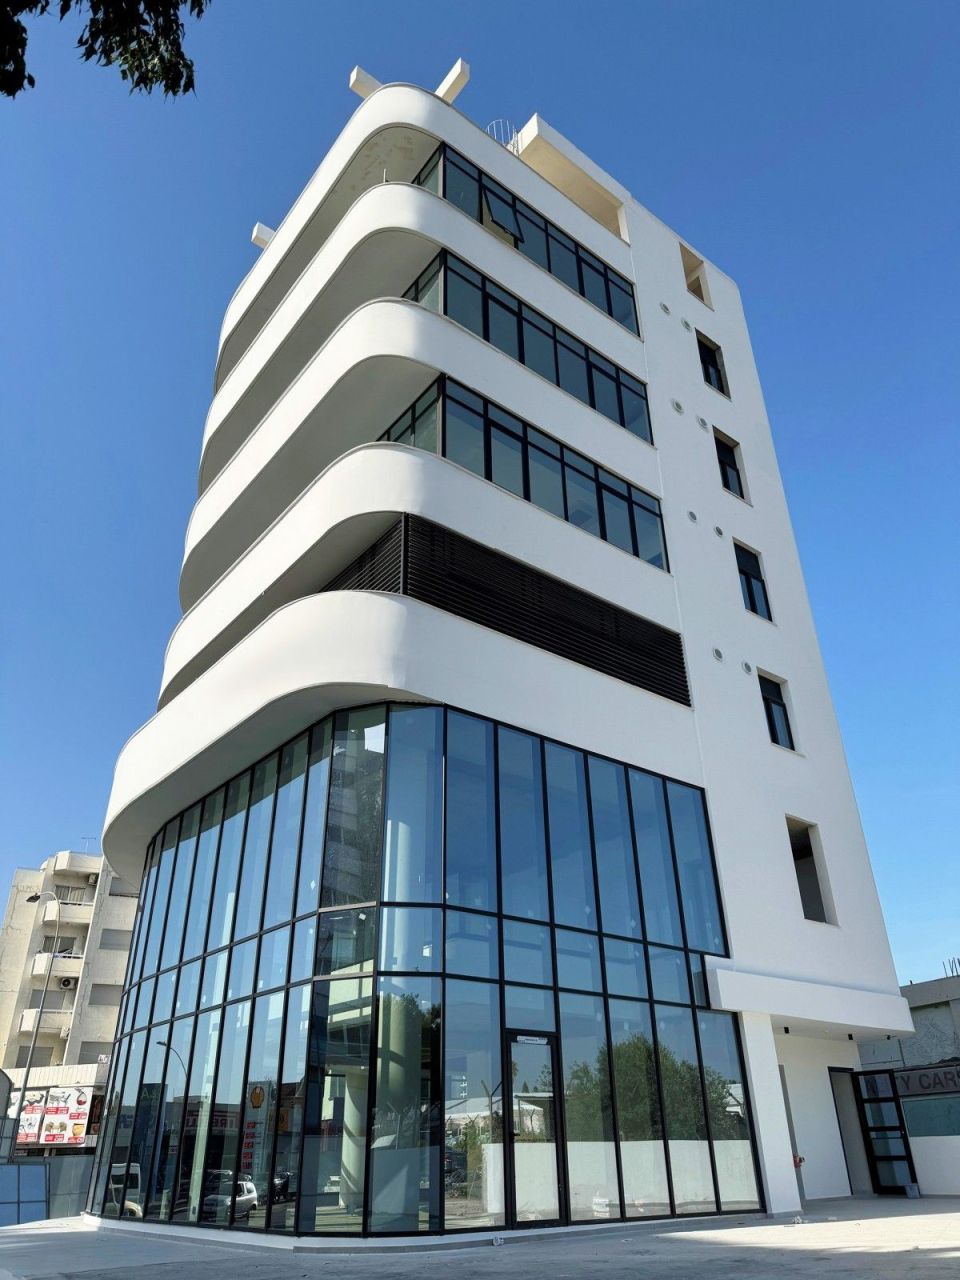 Commercial property in Limassol, Cyprus, 1 357 sq.m - picture 1